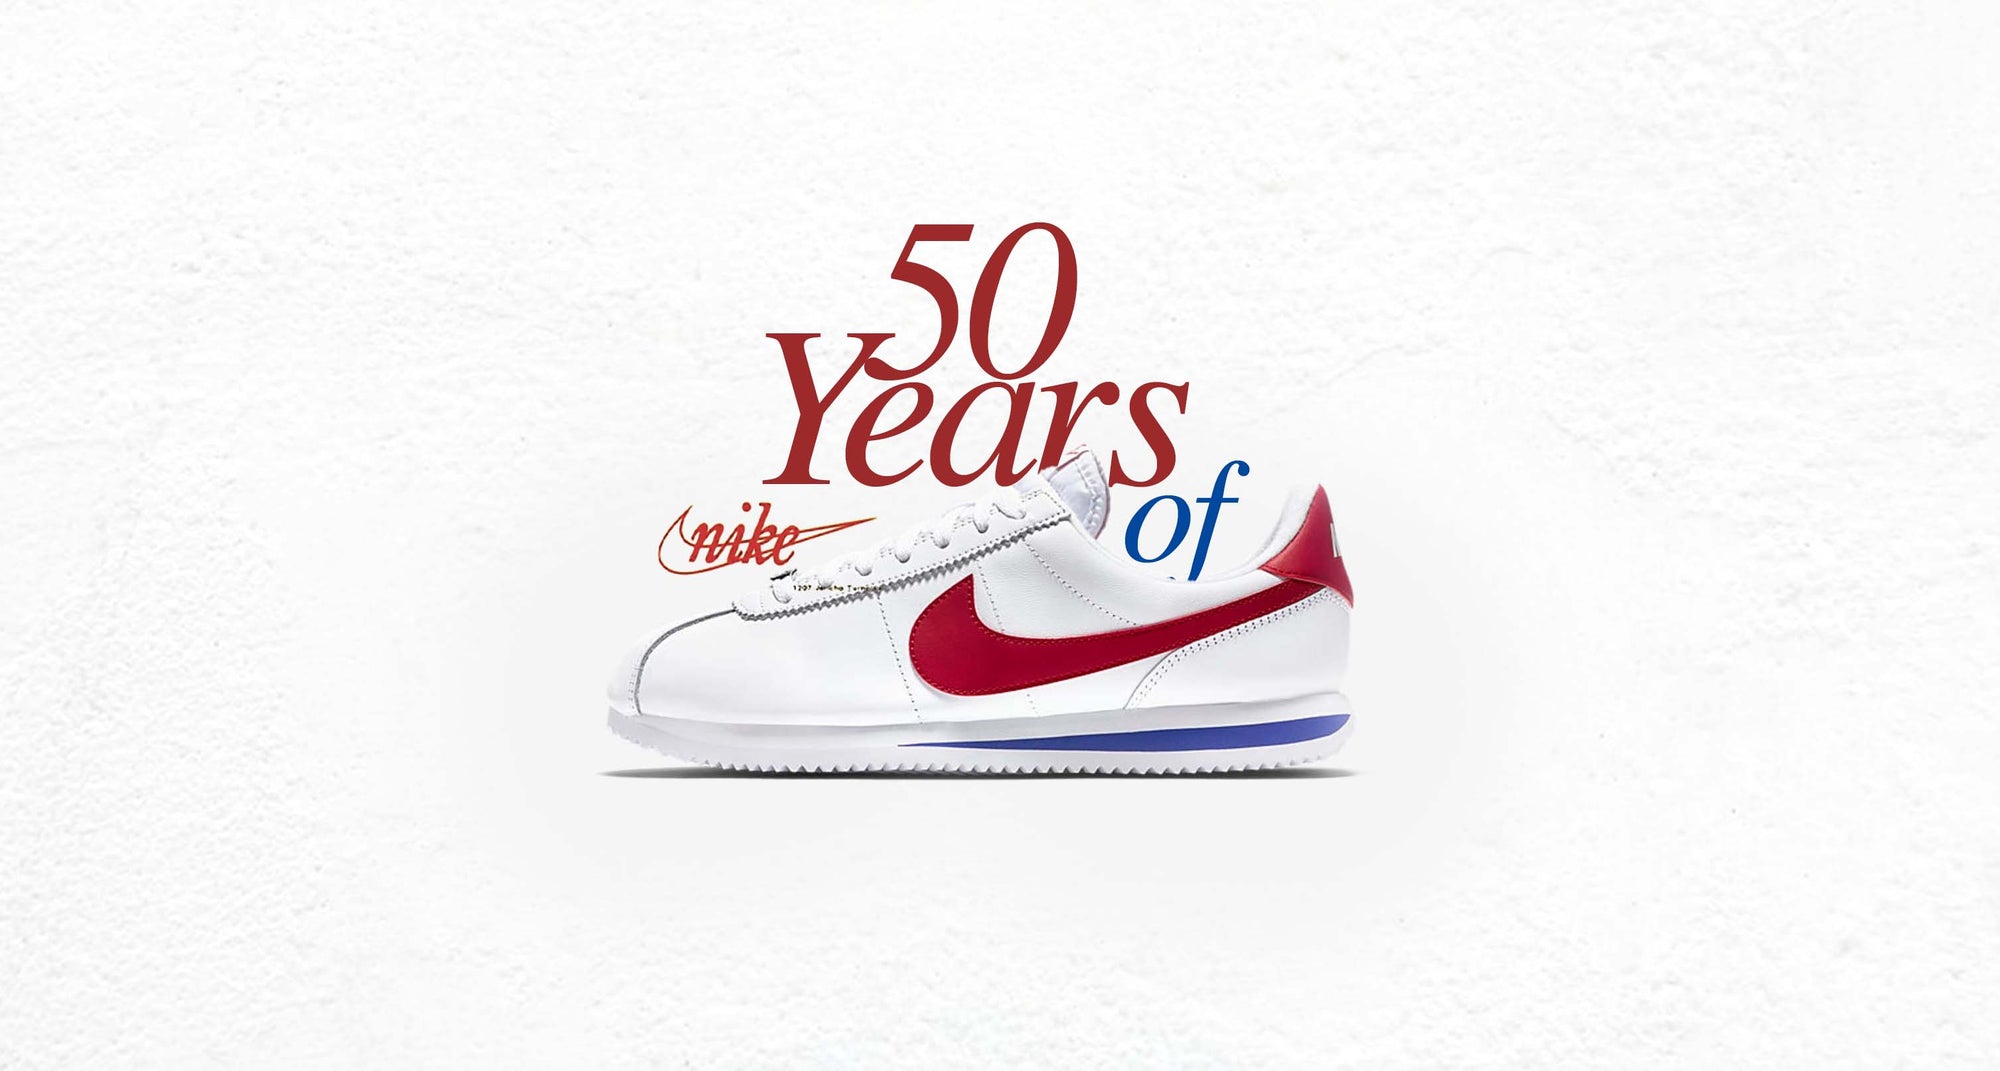 History of the Nike Cortez